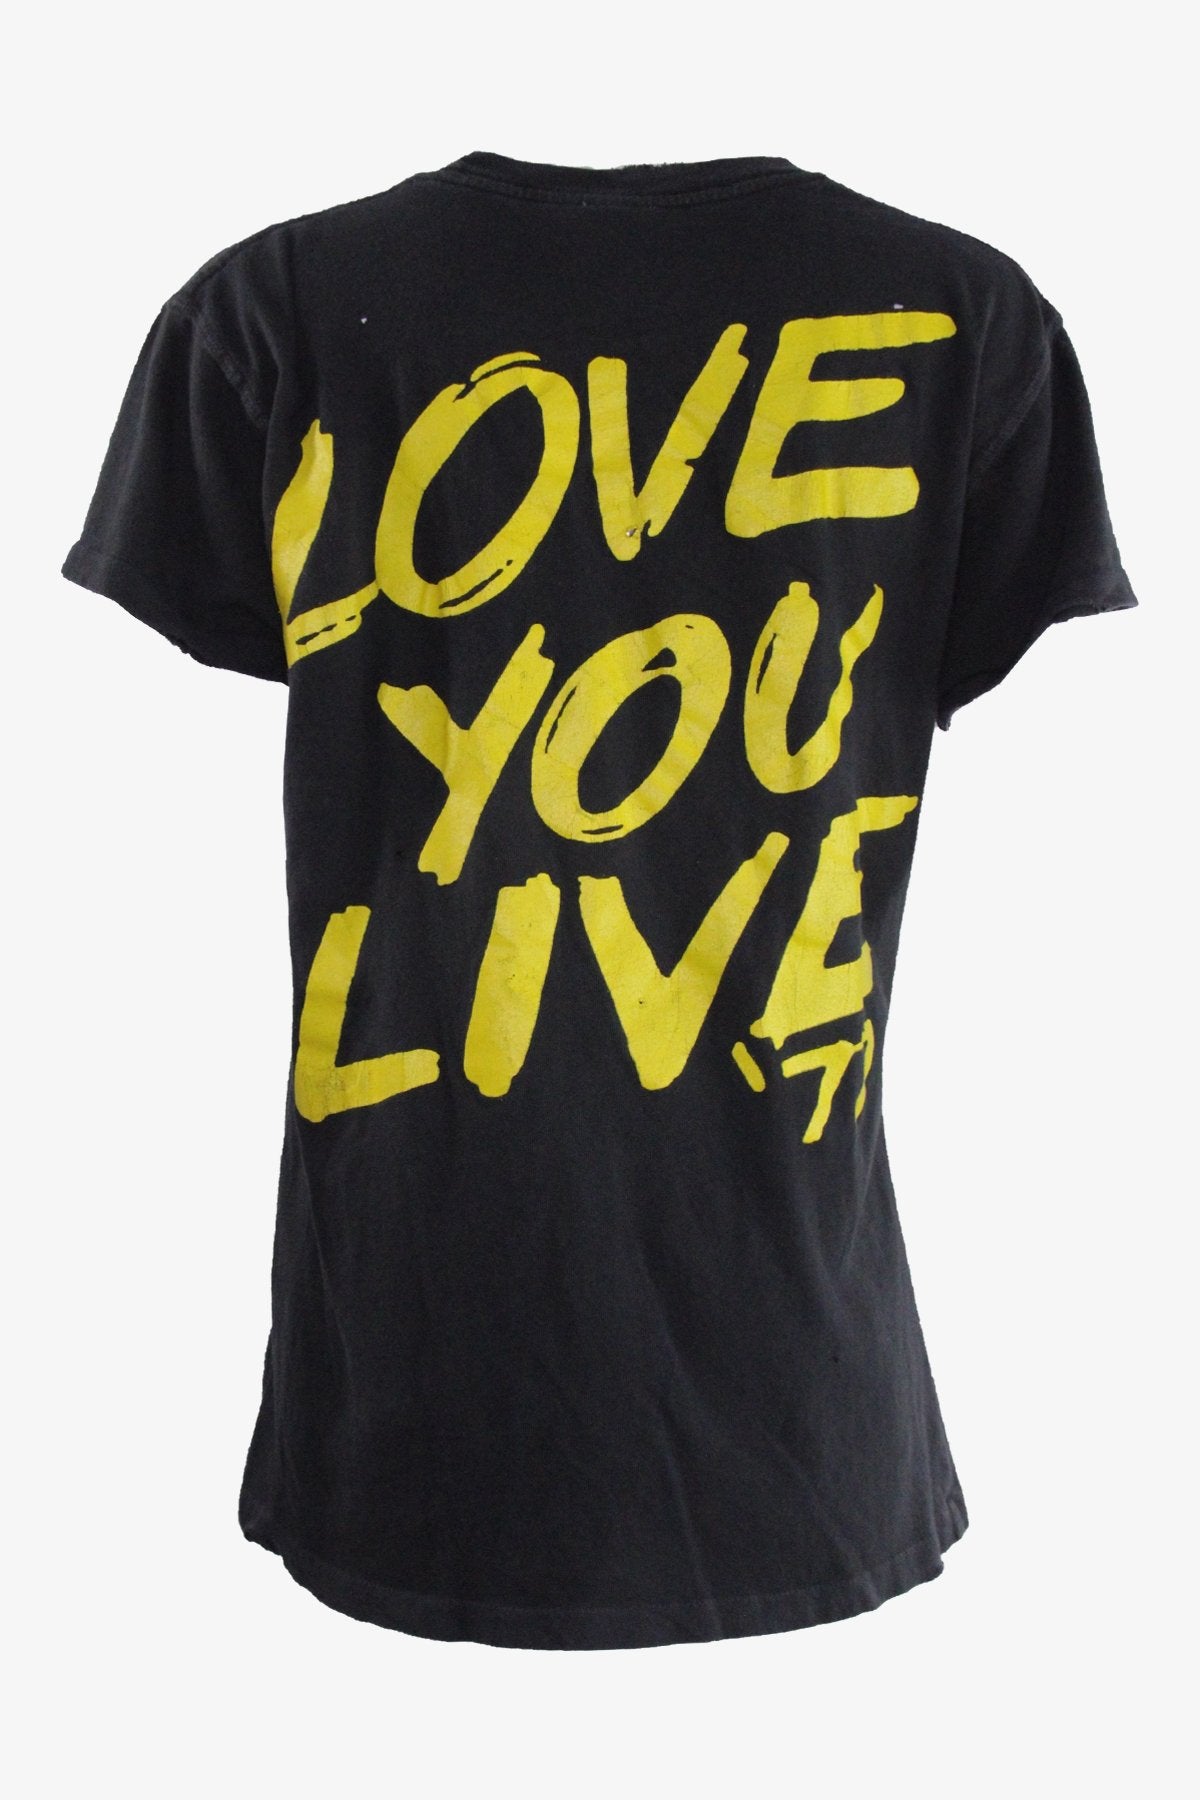 The Rolling Stones "Love You Live" Unisex T-Shirt in Black - shop-olivia.com